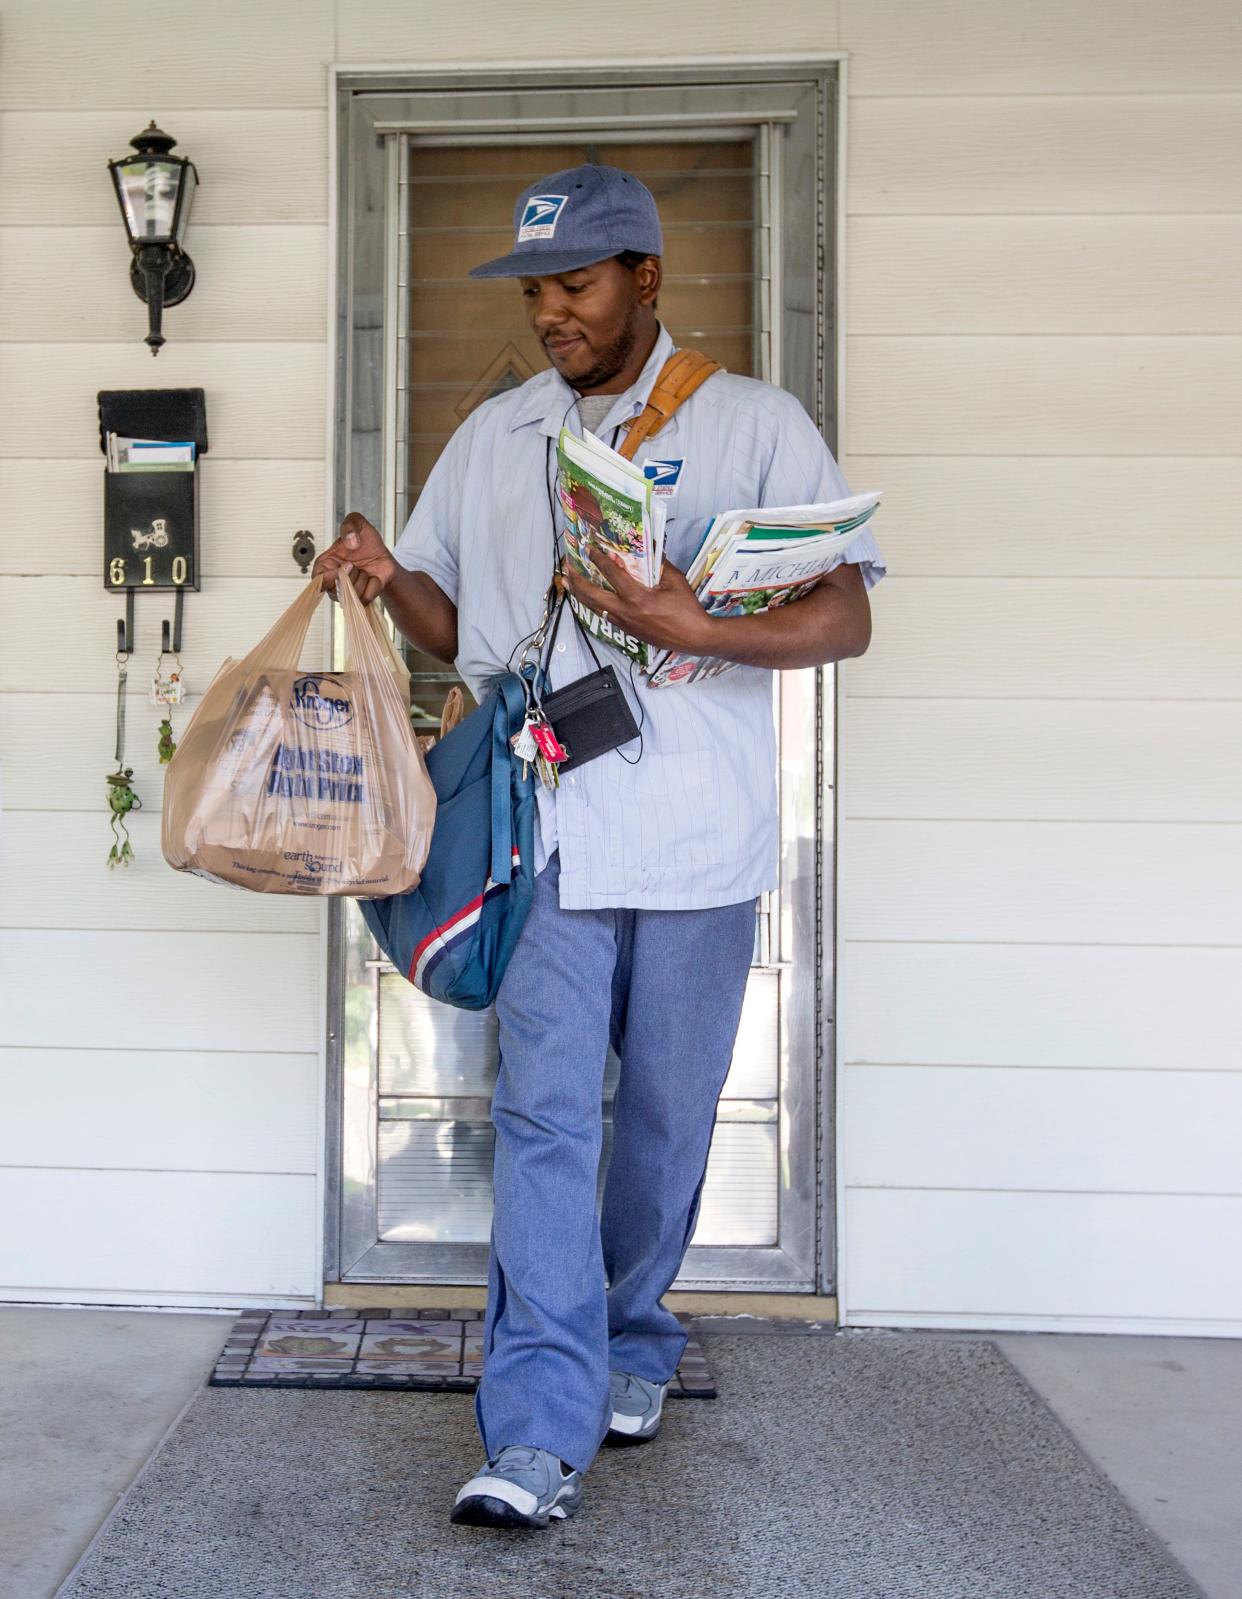 Letter carrier Sal Winters retrieves a bag of food donations from the front porch of a home in South Bend as part of the Stamp Out Hunger Food Drive in a recent year. ROBERT FRANKLIN, SOUTH BEND TRIBUNE